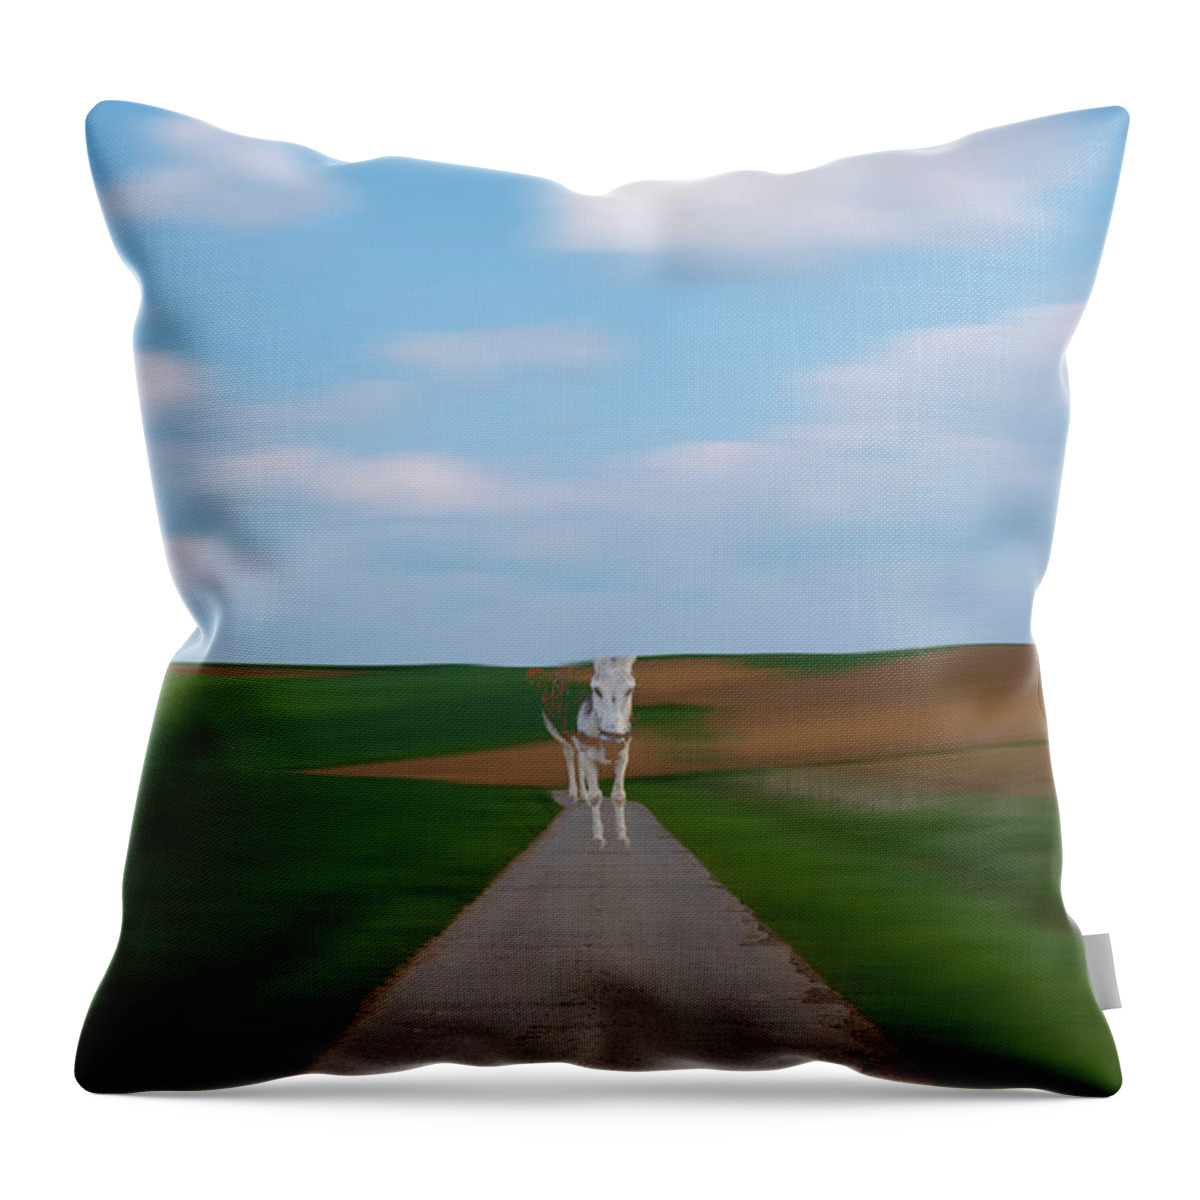 Abstract Throw Pillow featuring the photograph The Approaching Donkey by Rabiri Us